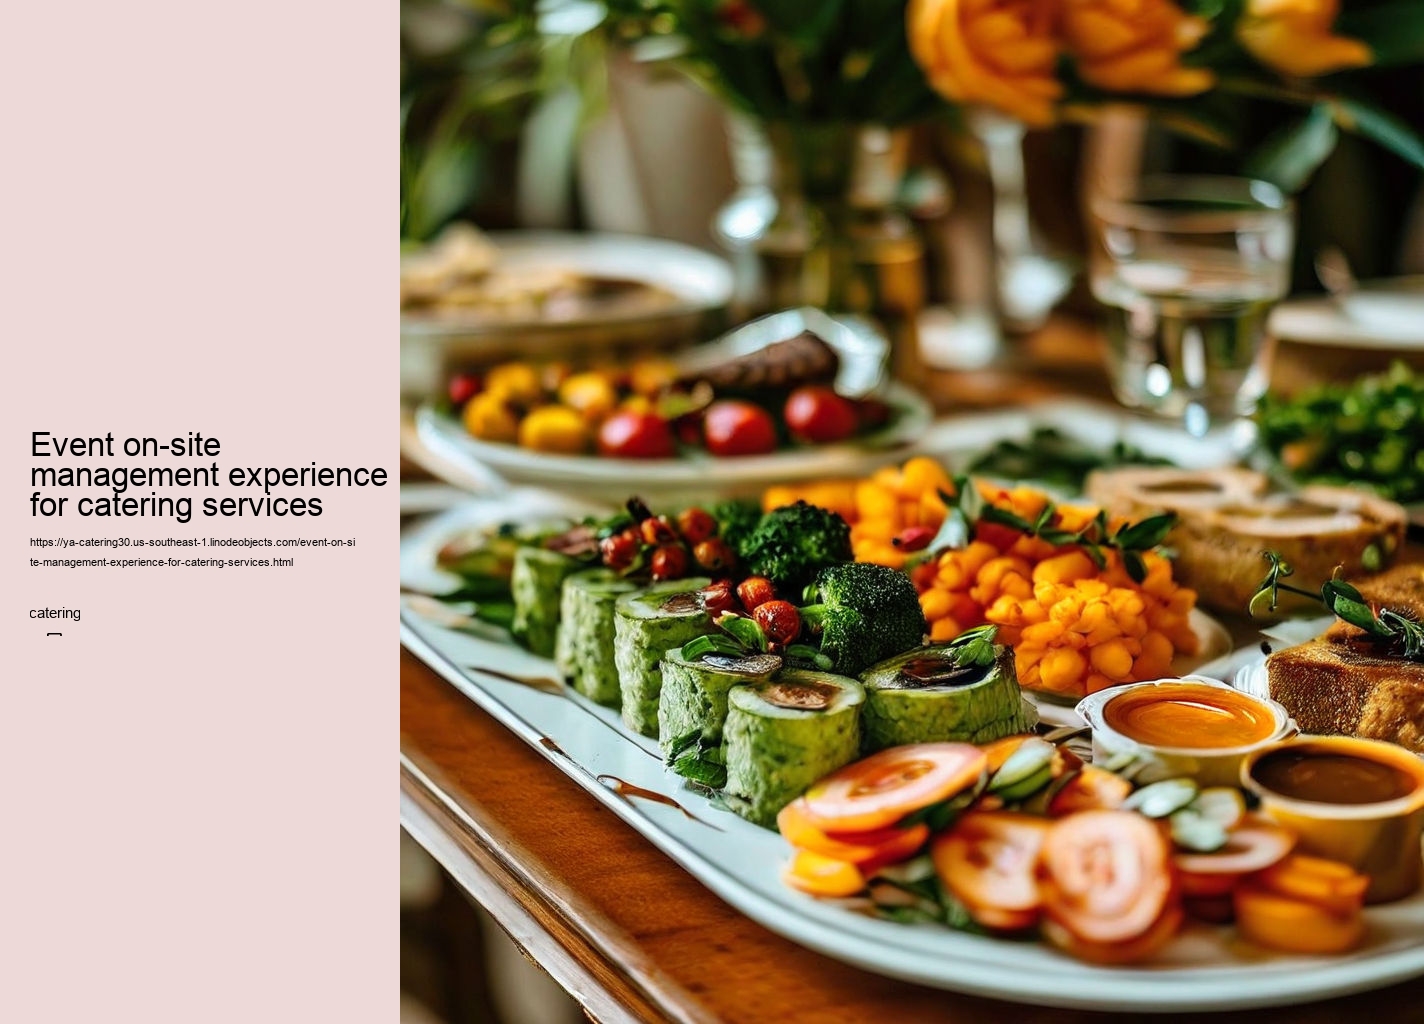 Event on-site management experience for catering services